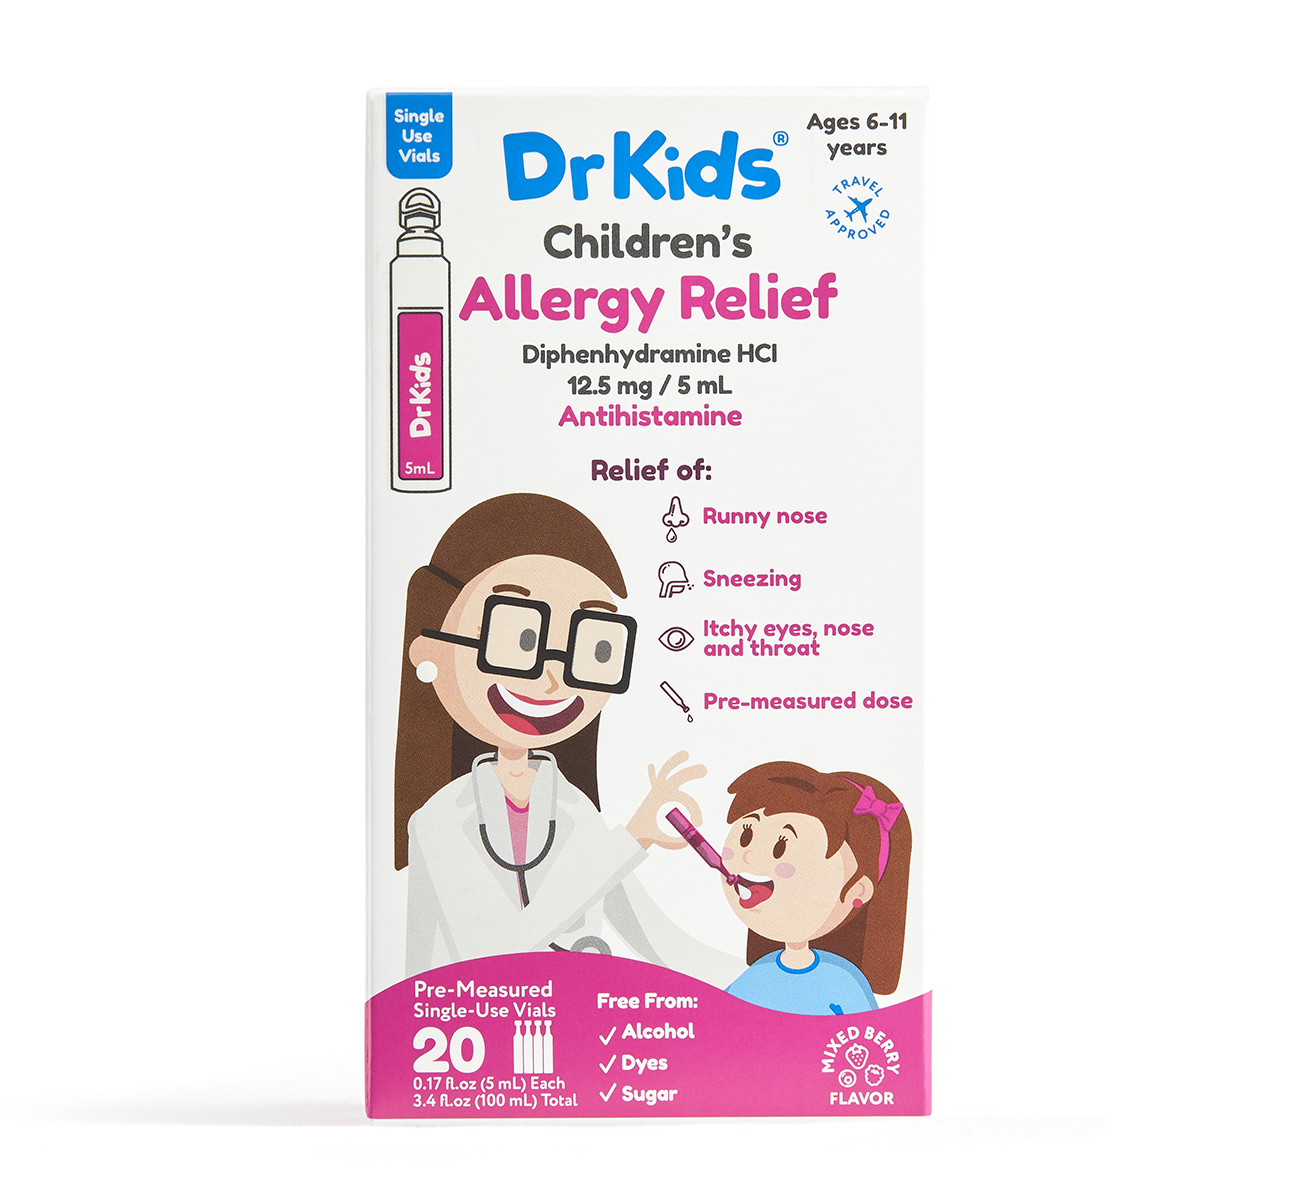 Dr Kids Allergy Product